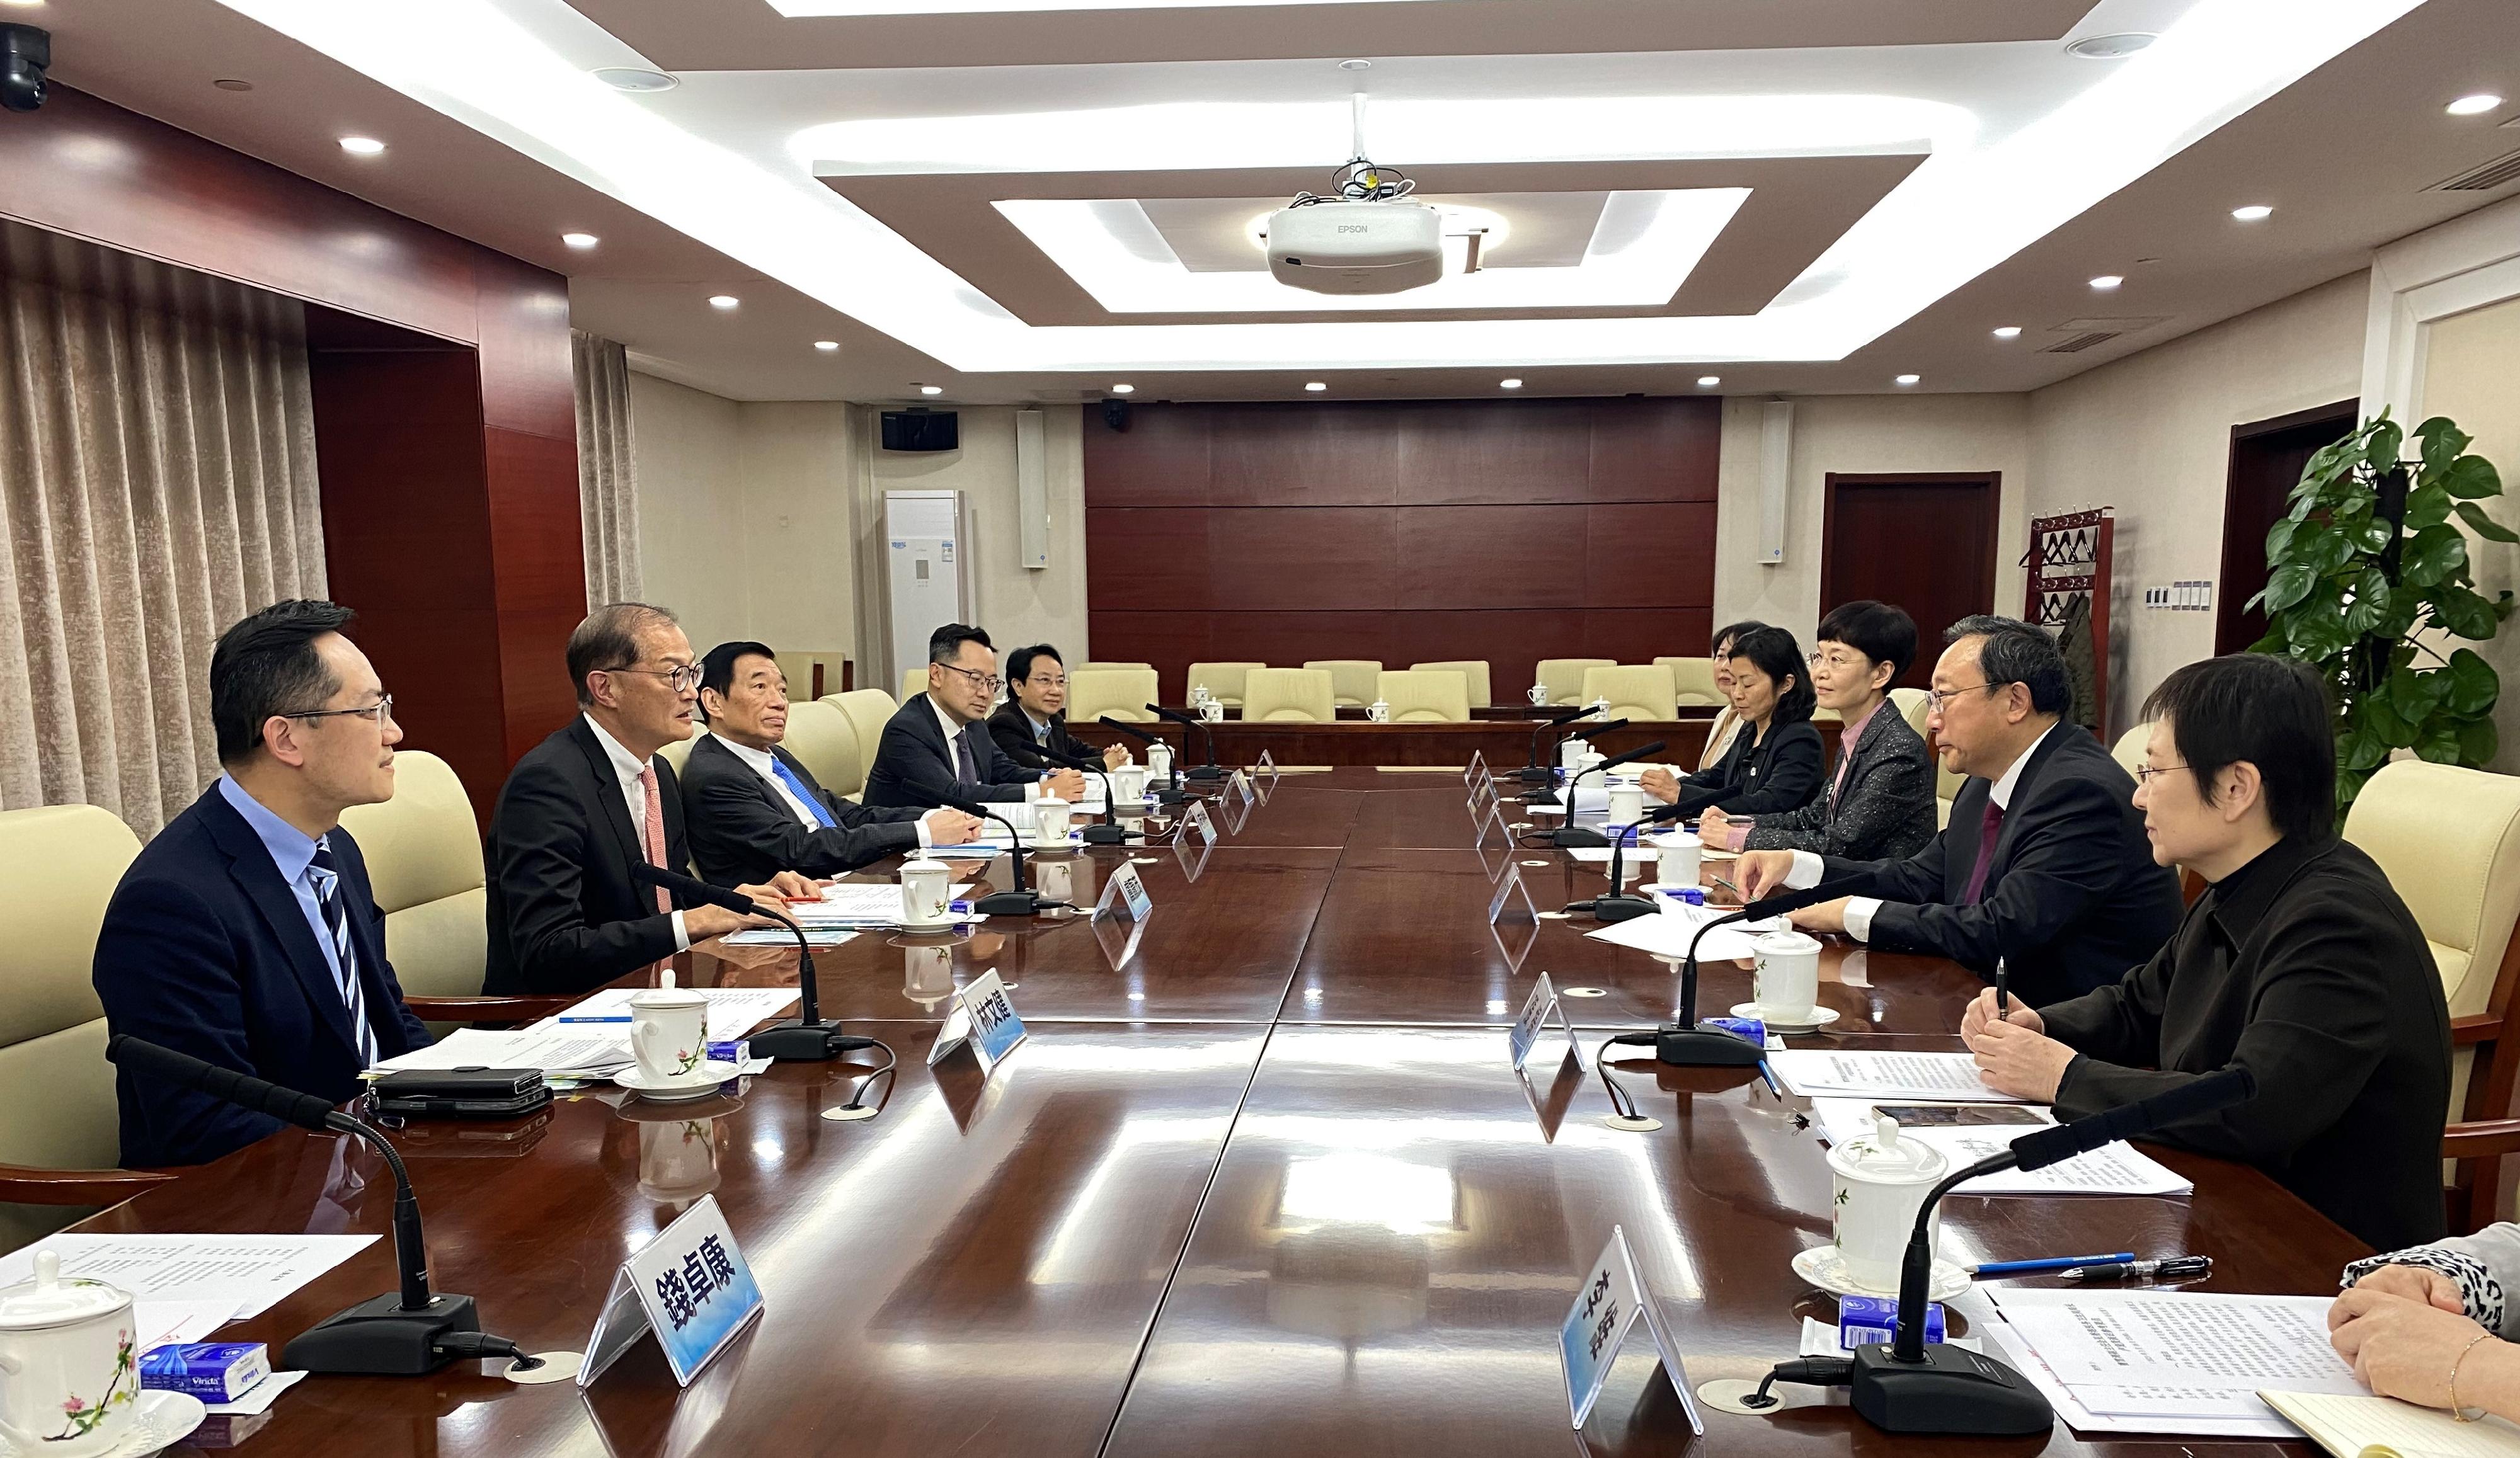 The Secretary for Health, Professor Lo Chung-mau and his delegation called on the National Health Commission (NHC) today (March 16). Photo shows Professor Lo (second left) in a meeting with the Vice-minister of the NHC, Mr Cao Xuetao (second right), with the Director General of the Office of Hong Kong, Macao and Taiwan Affairs of the NHC, Ms Zhang Yang (first right); the Director of Health, Dr Ronald Lam (first left); Deputy Secretary for Health Mr Eddie Lee (fourth left); and the Chairman of the Hospital Authority, Mr Henry Fan (third left) in attendance.